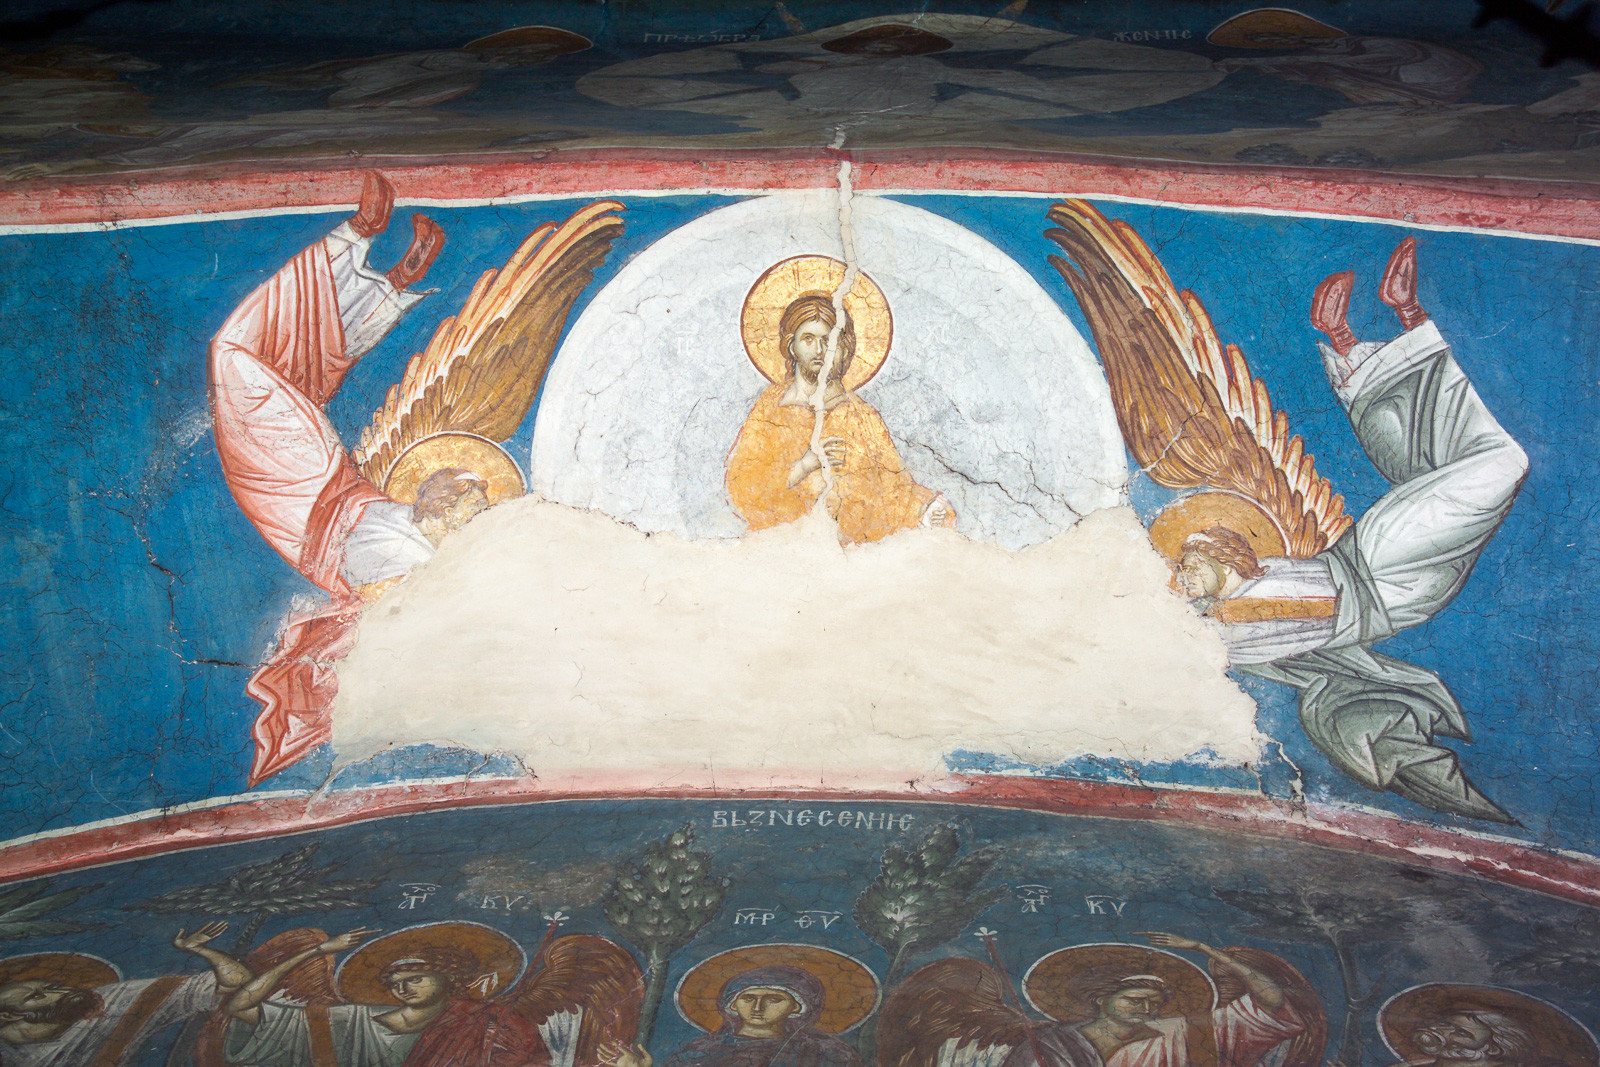 27c Christ in the Mandorla, Taken up into Heaven by Angels, a detail of the Ascension of Christ